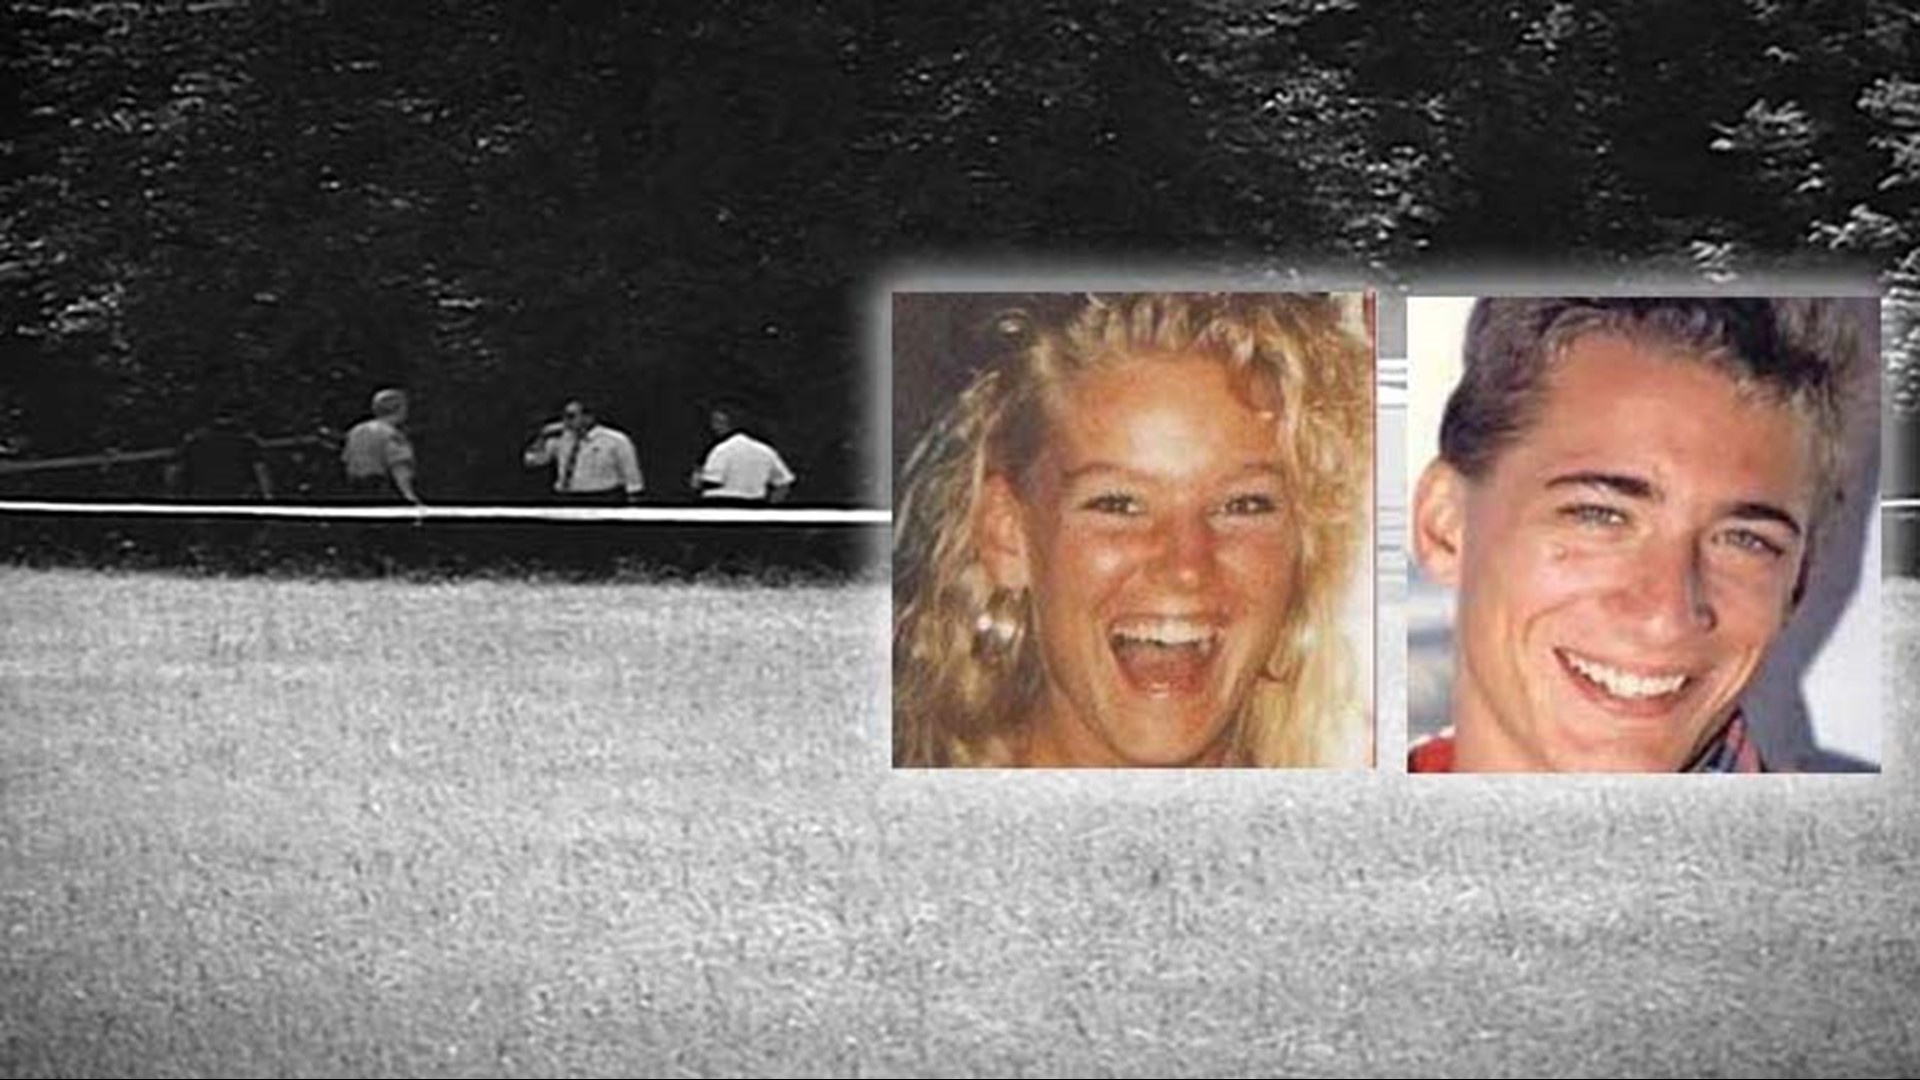 Cheryl was raped and her throat was slit. Andy was tied to a tree and nearly decapitated. 33 years later, their killer hasn't been caught.